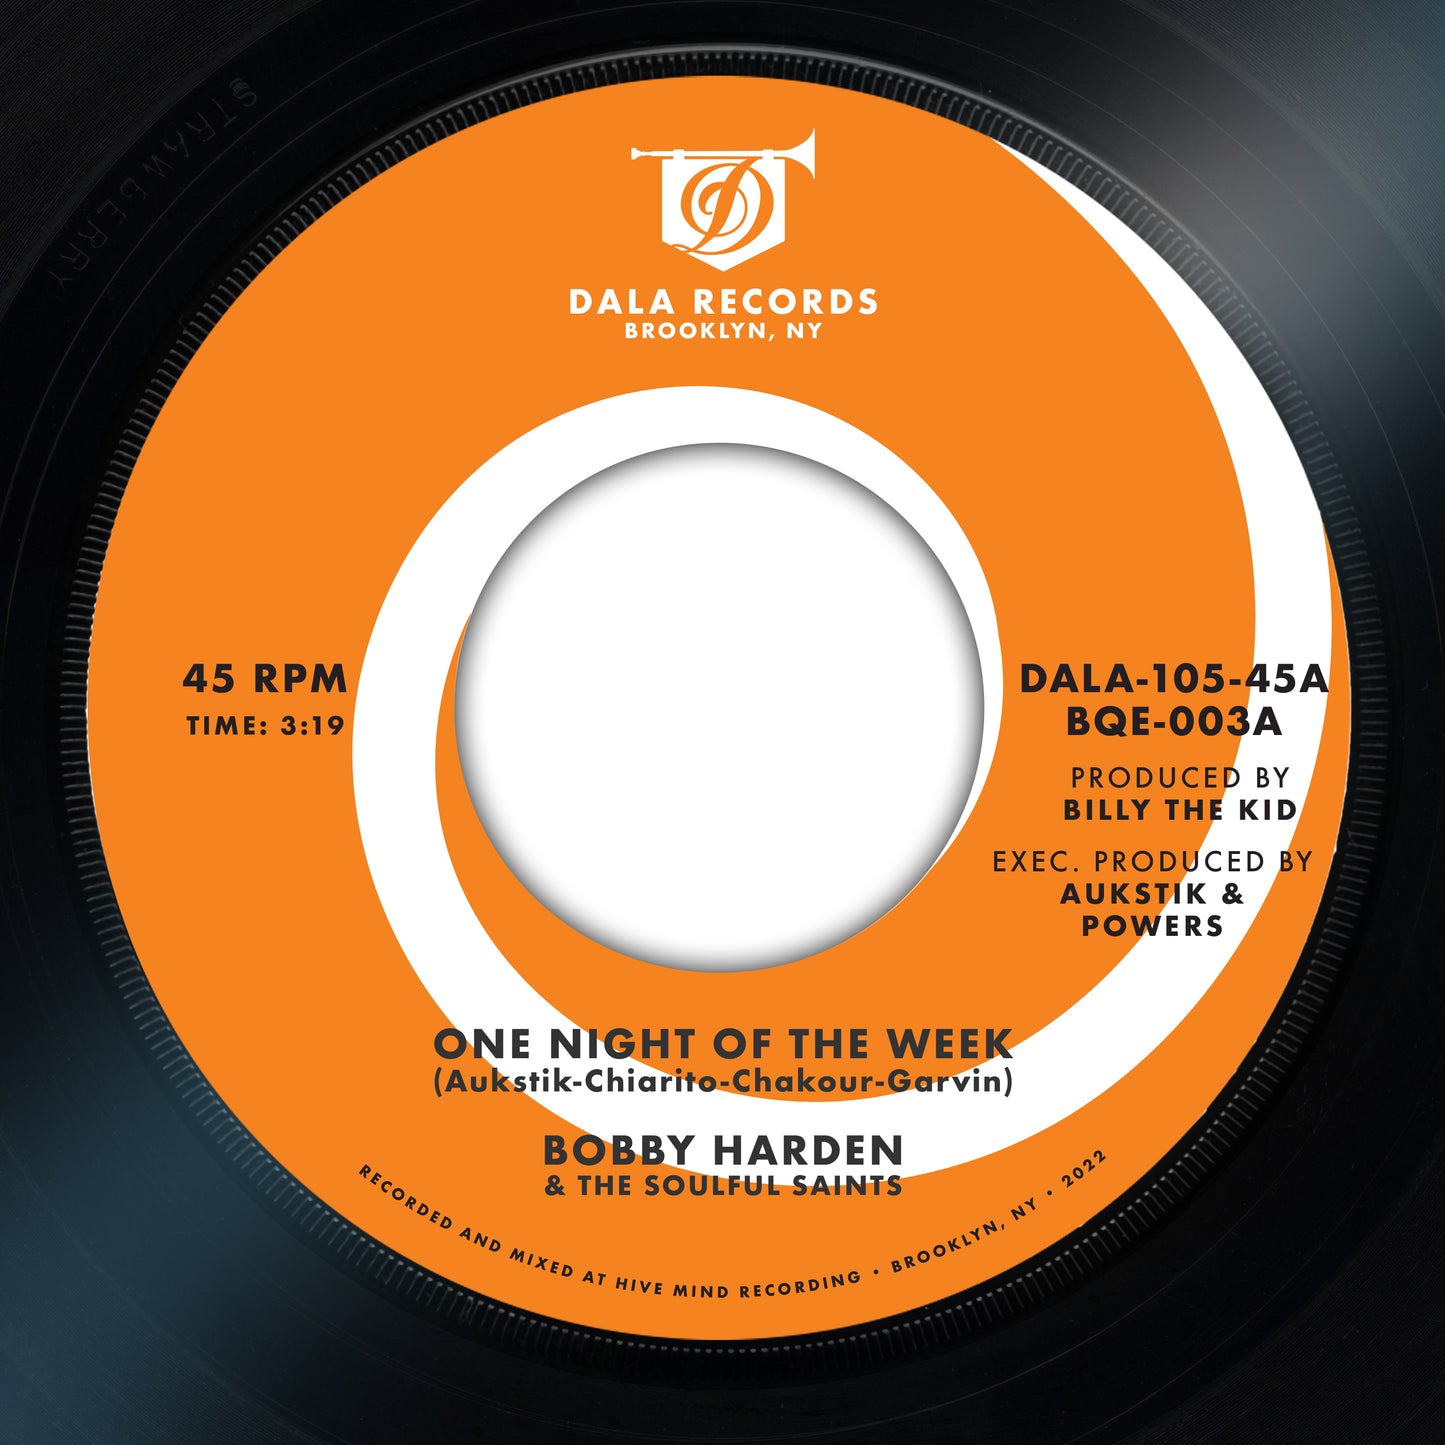 Bobby Harden & The Soulful Saints "One Night of the Week / Raise Your Mind" 45